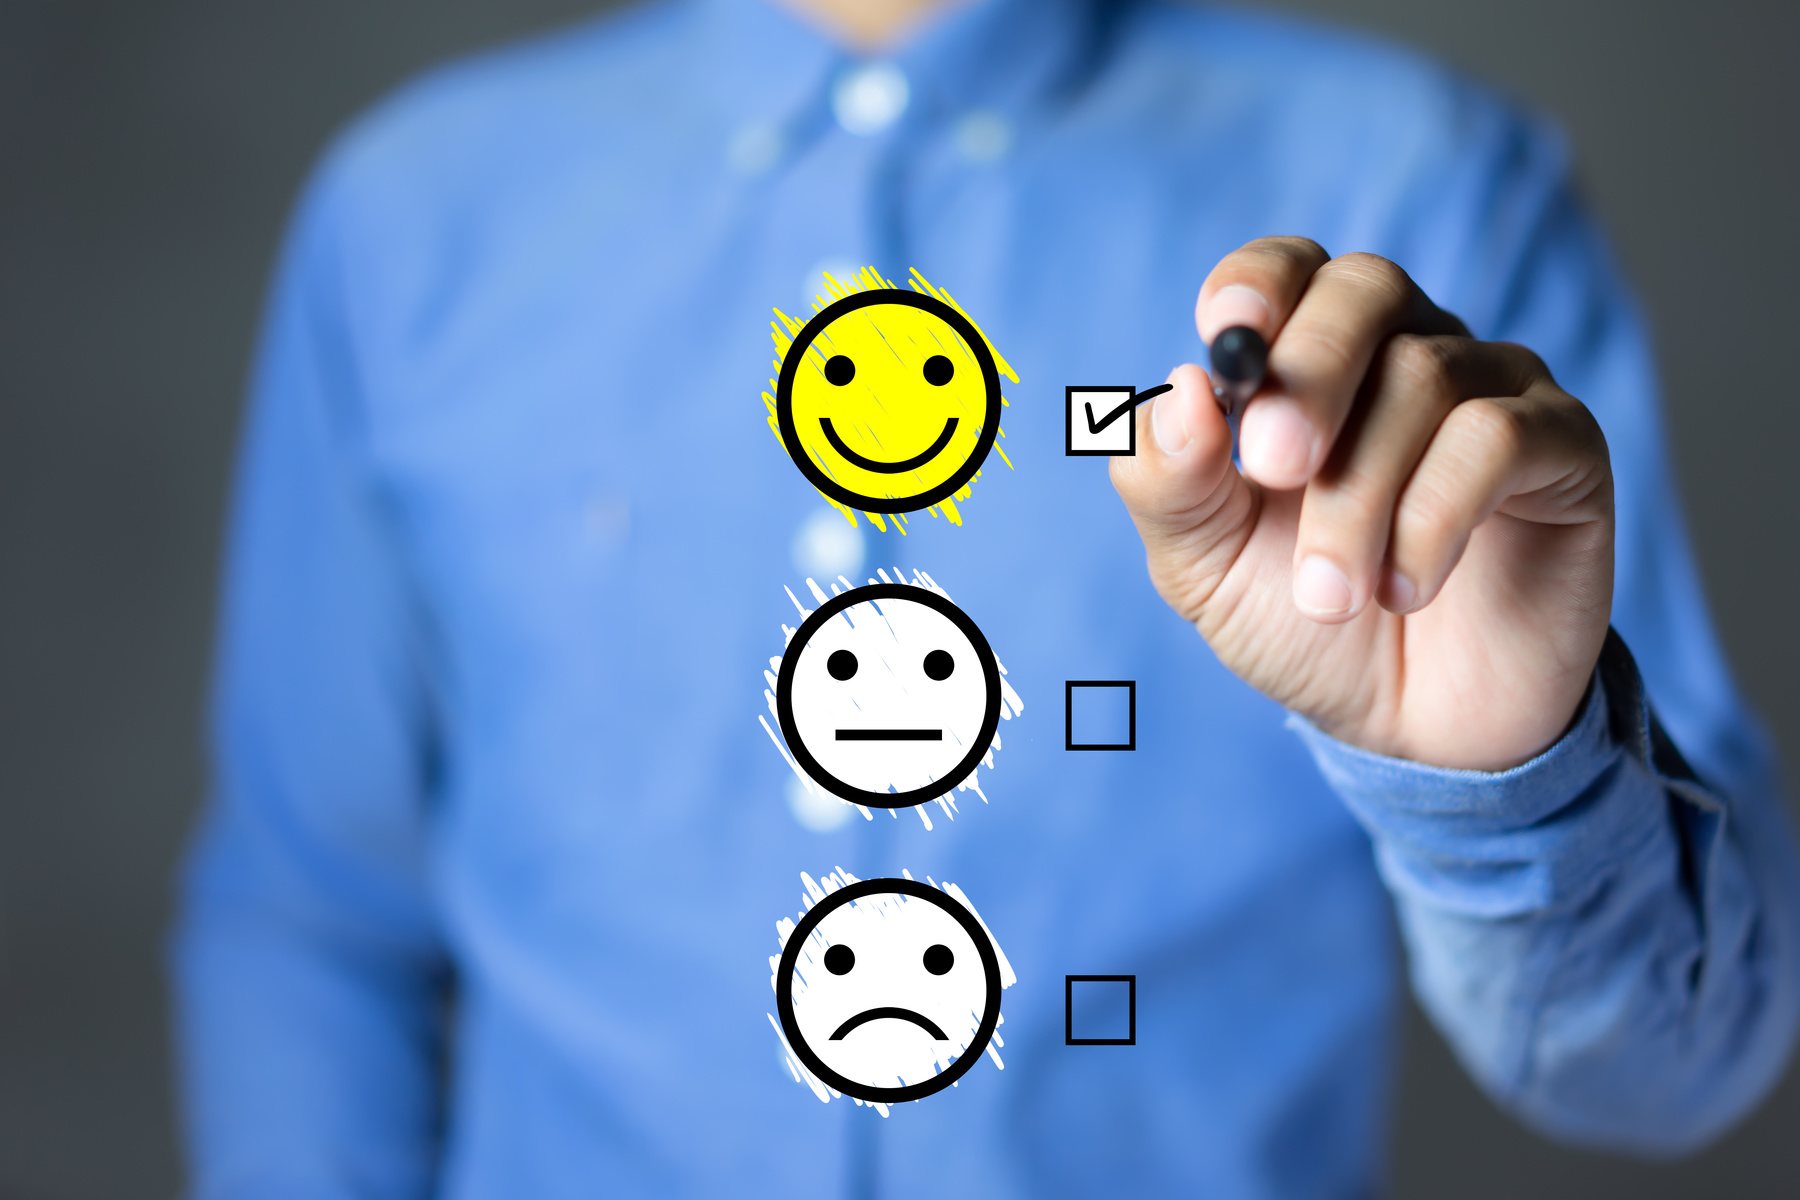 Businessman hand putting check mark a checkbox on excellent smiley face rating for a satisfaction survey, Customer experience concept.